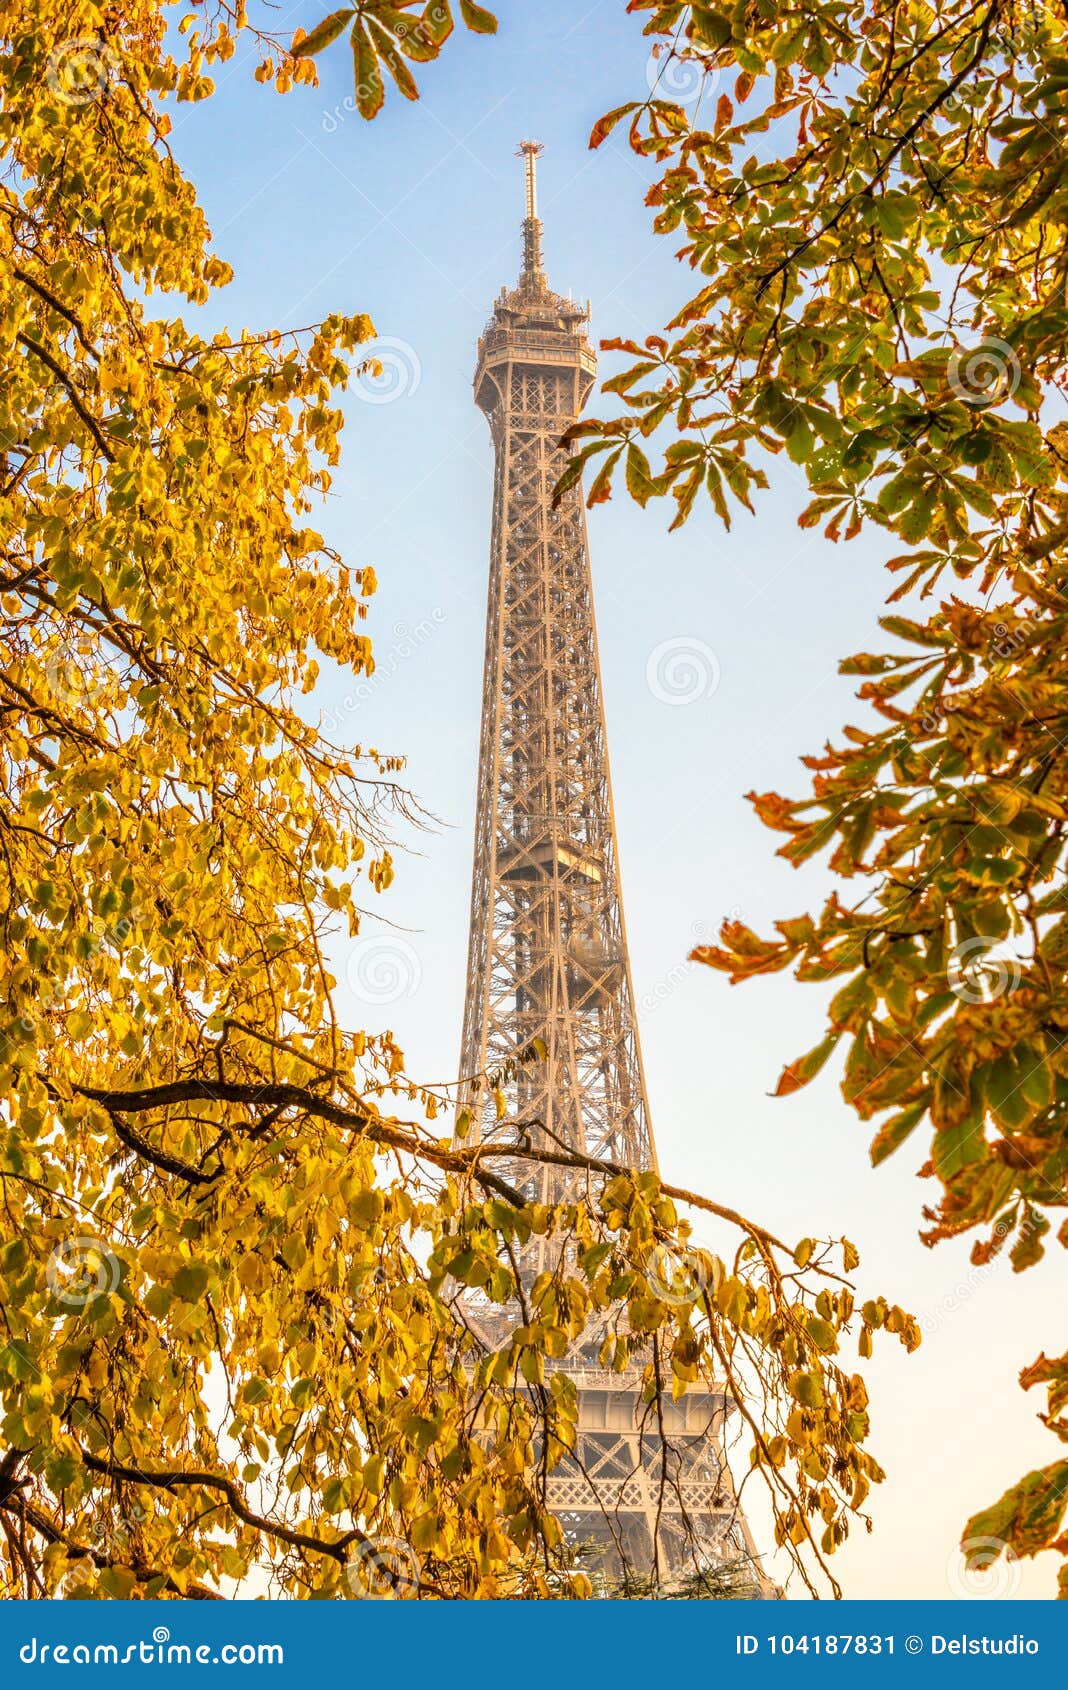 Eiffel Tower, Yellow Automnal Trees, Paris France Stock Image - Image